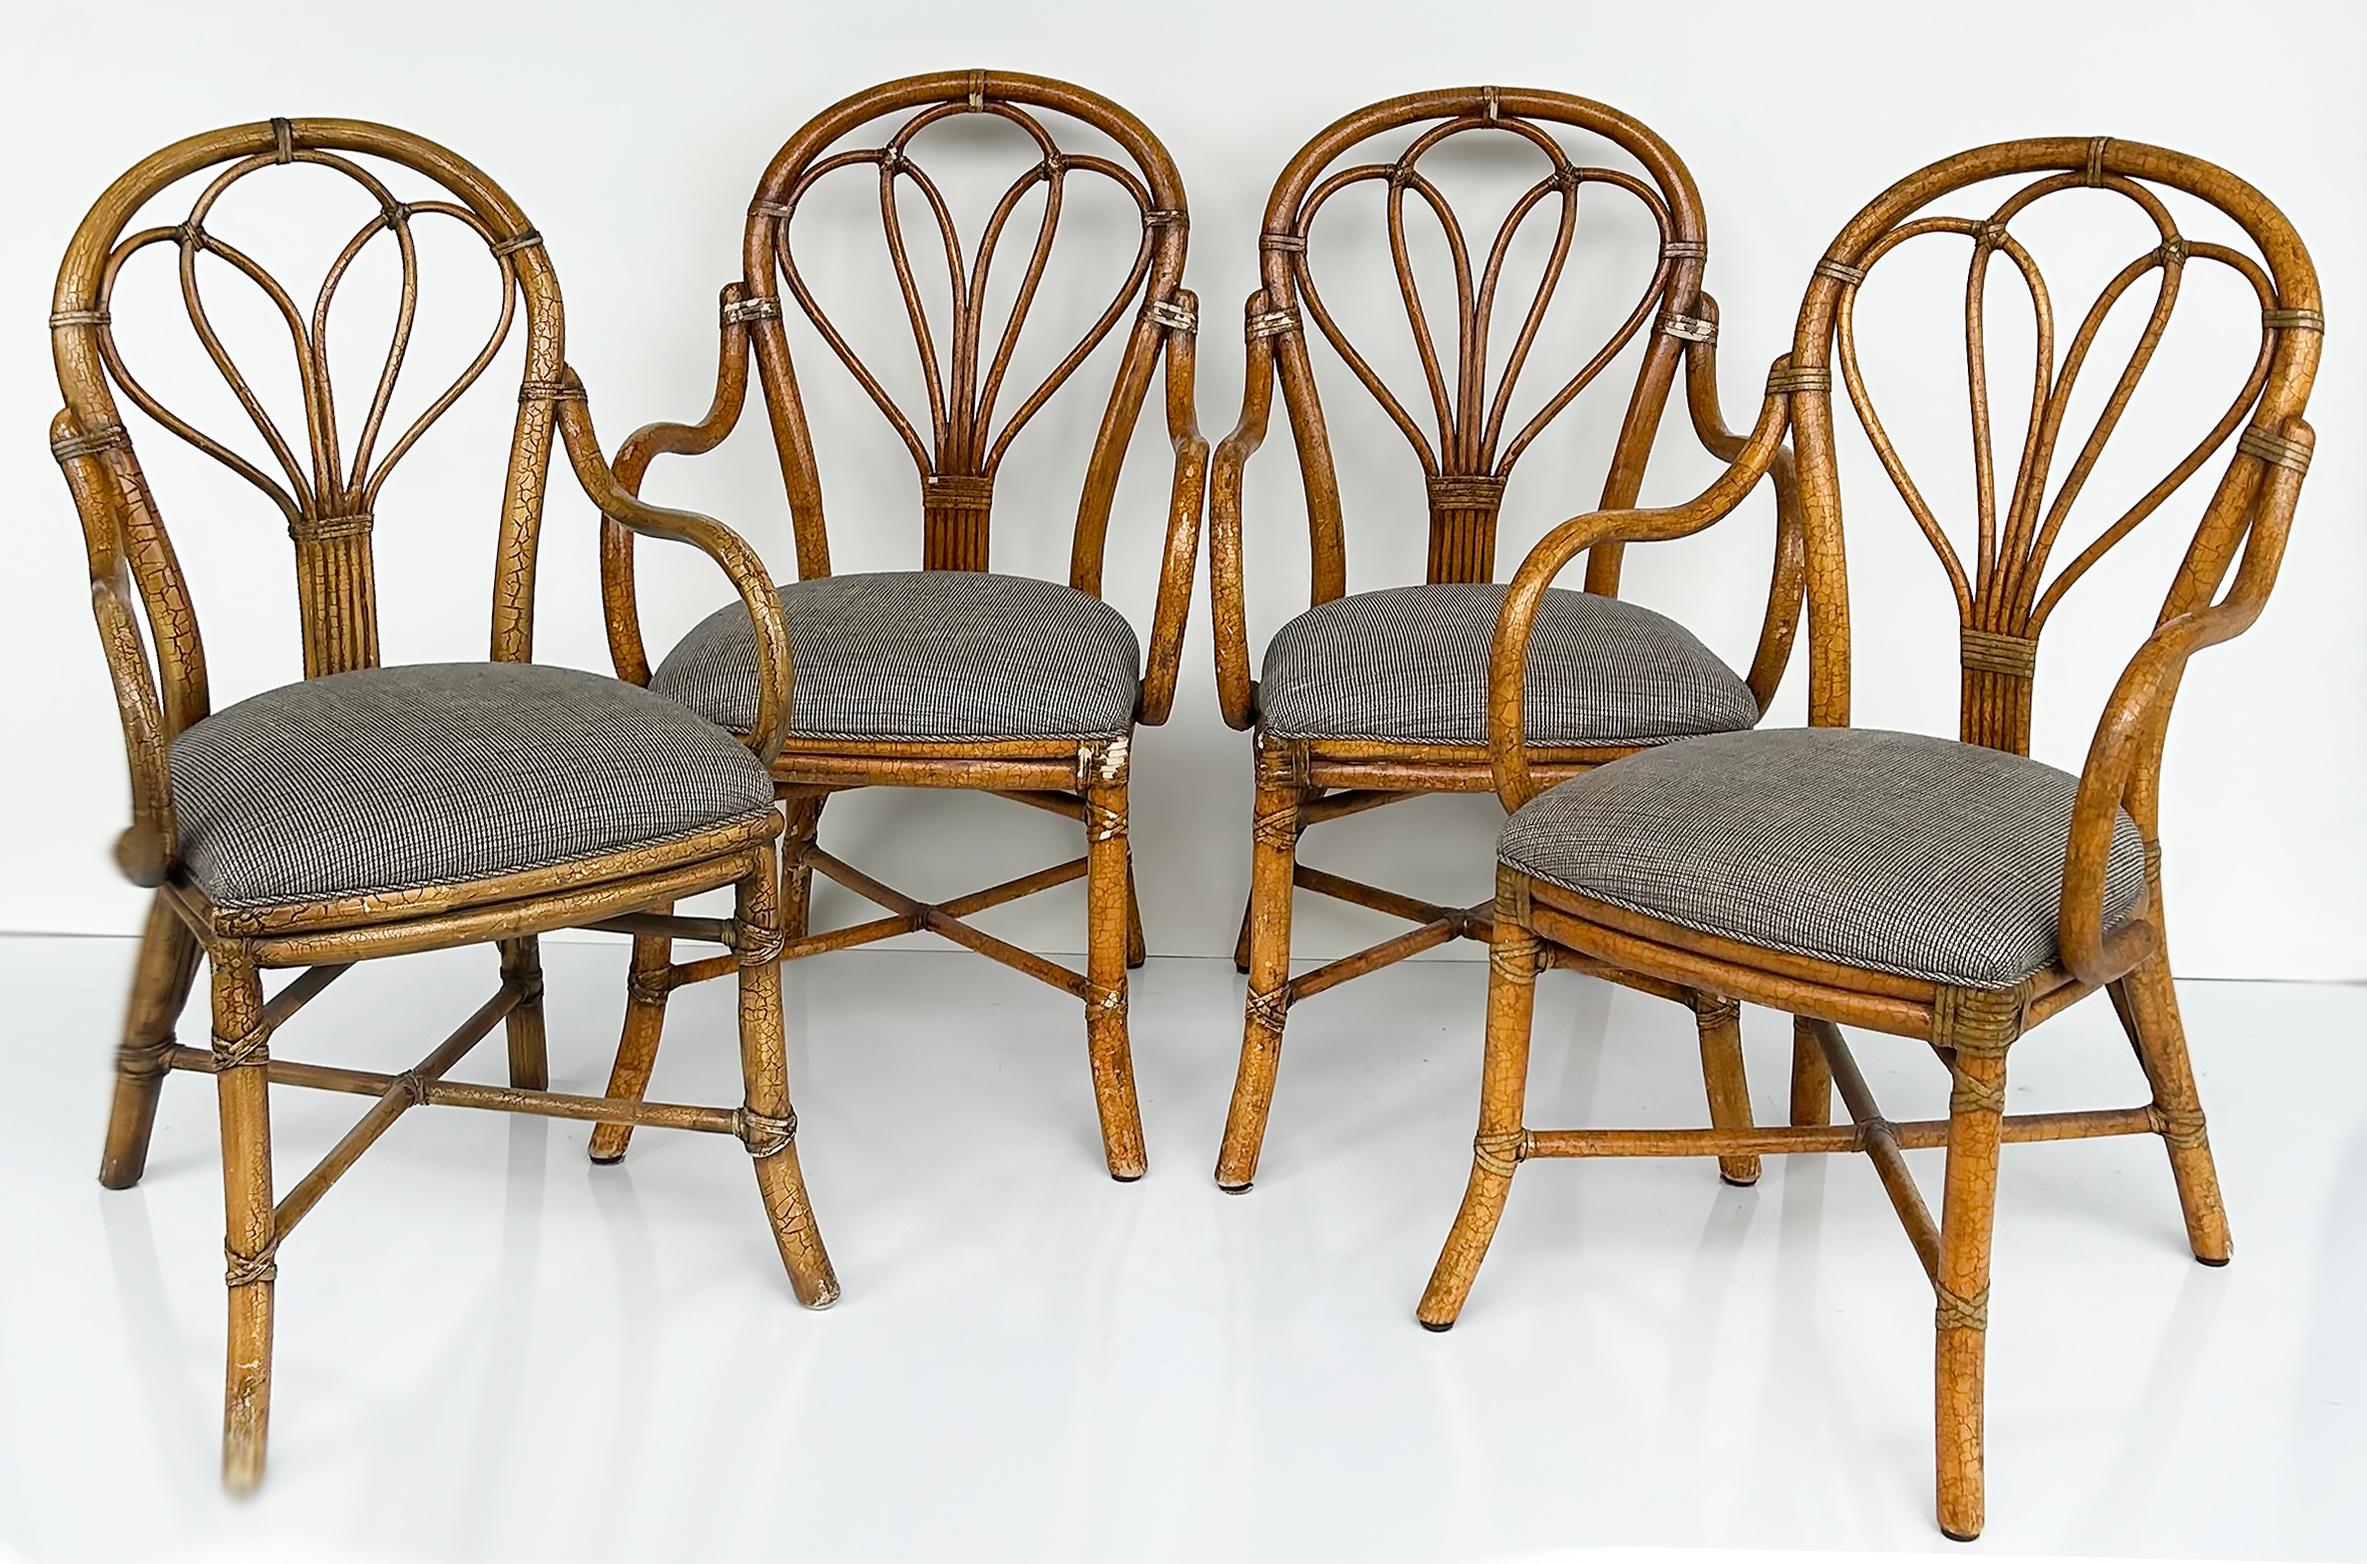 McGuire San Francisco Set of 4 Upholstered Rattan Armchairs with Rawhide

Offered for sale is a set of 4 upholstered rattan dining armchairs from McGuire San Francisco.   The chairs have rawhide-wrapped joints and the rattan has a craquelure finish.